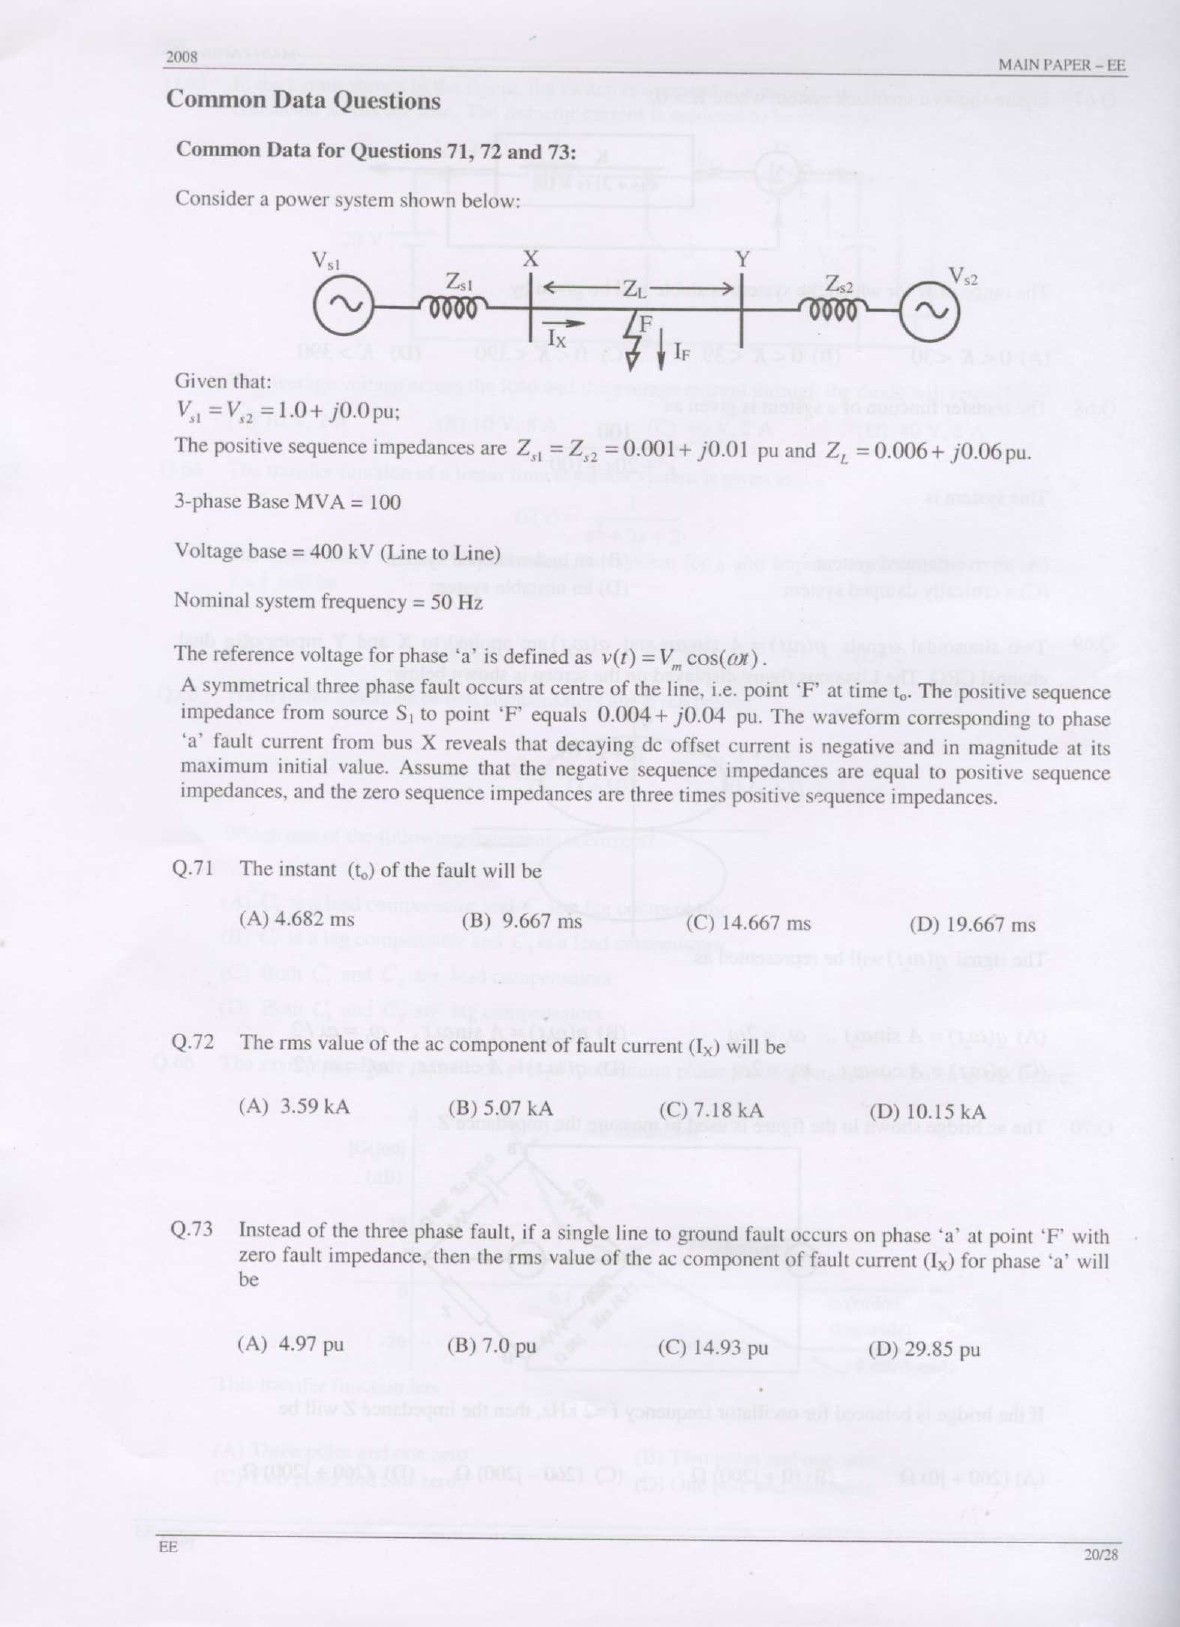 GATE Exam Question Paper 2008 Electrical Engineering 20